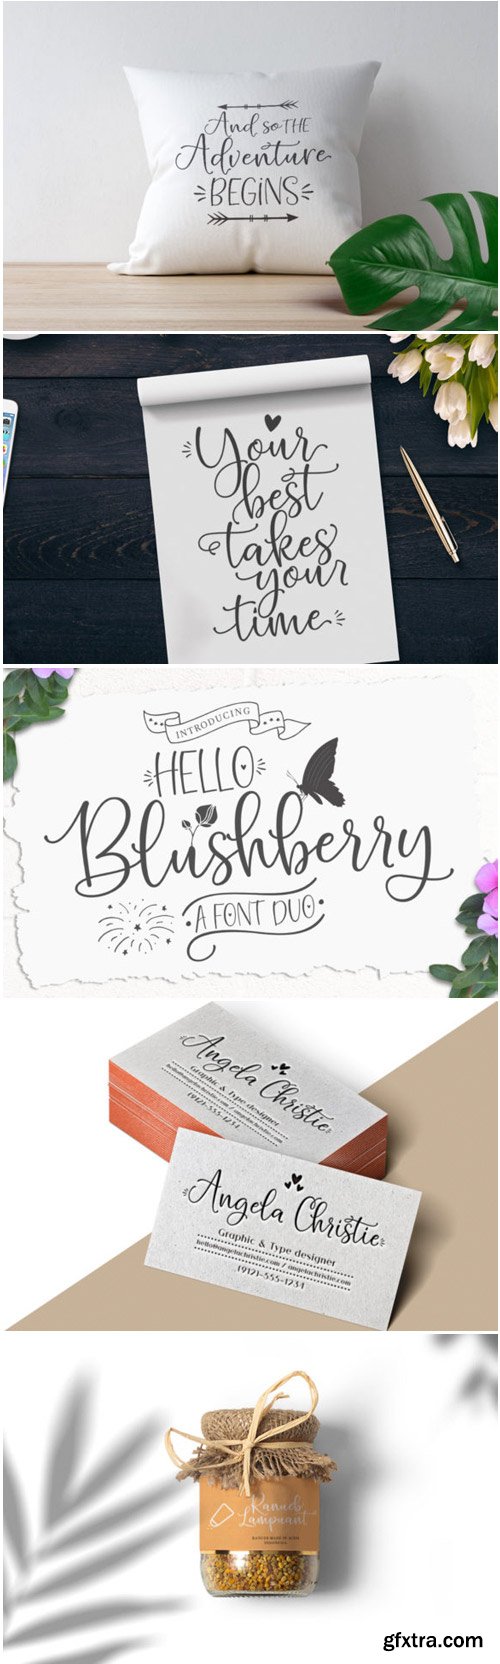 Hello Blushberry Duo Font